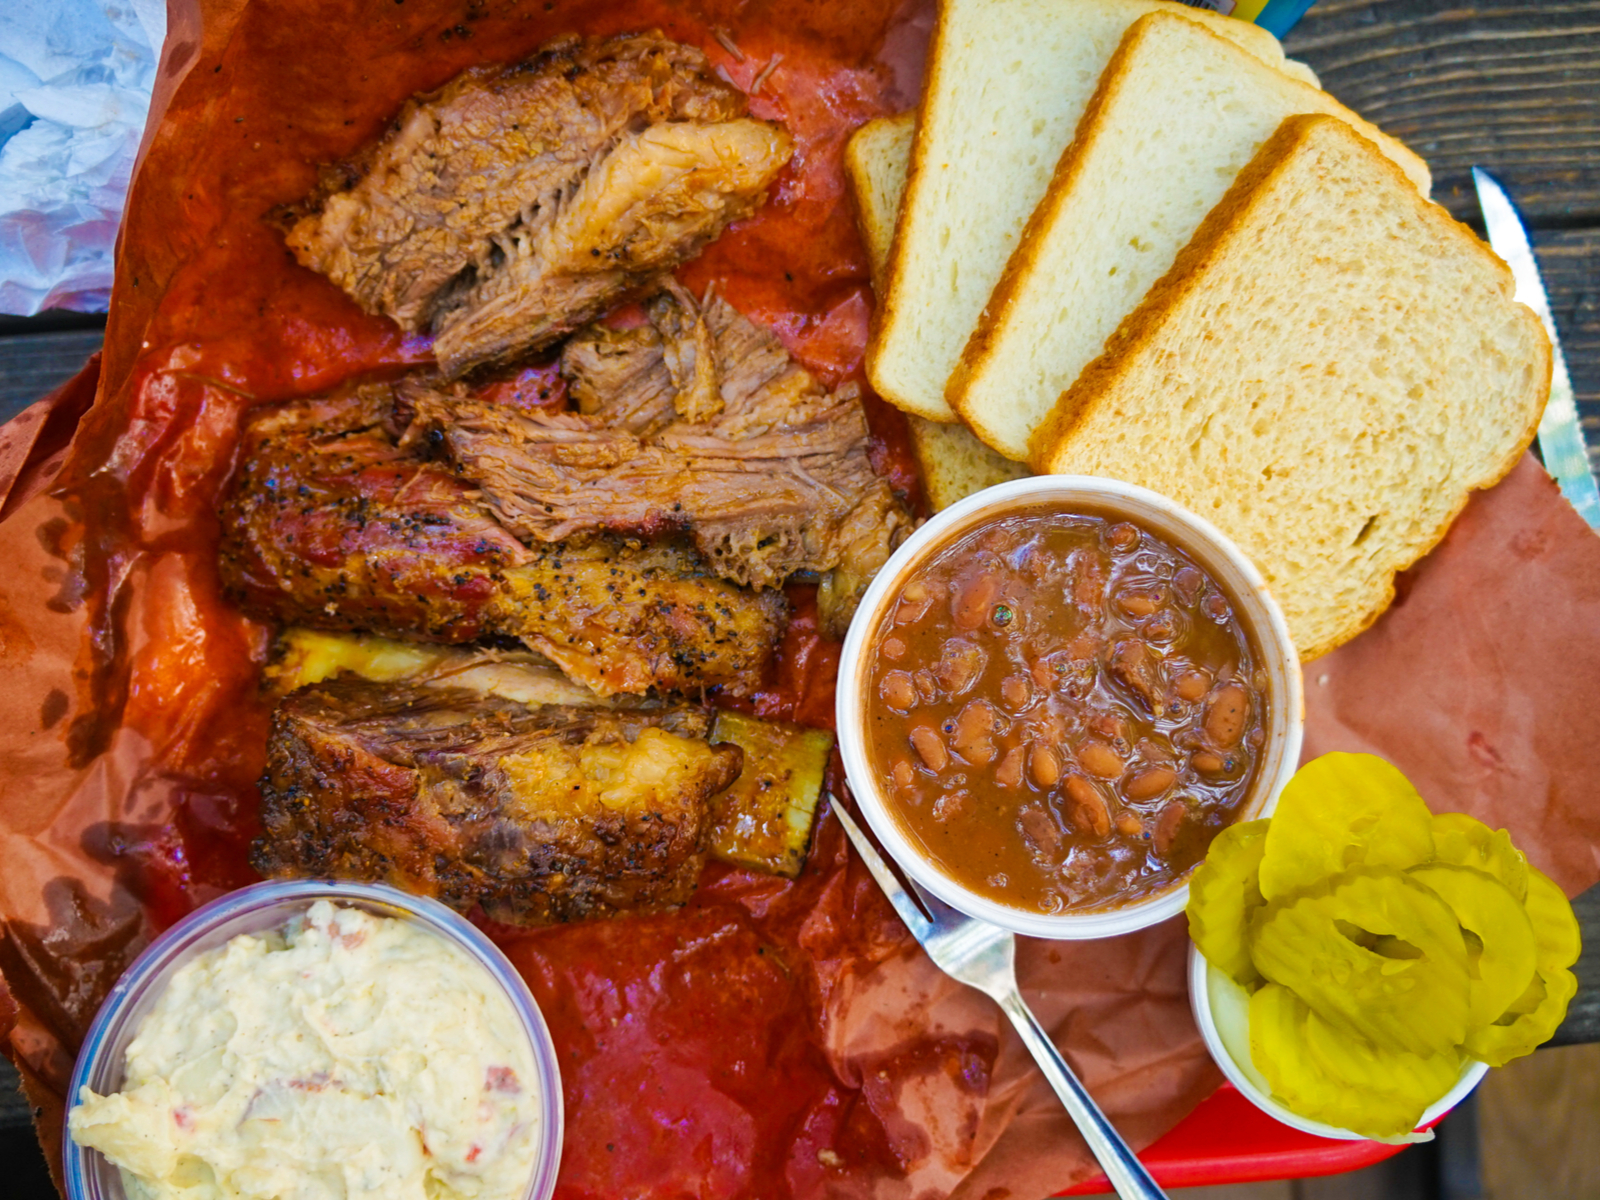 Tasty looking food on a plate filled with bbq and cornbread